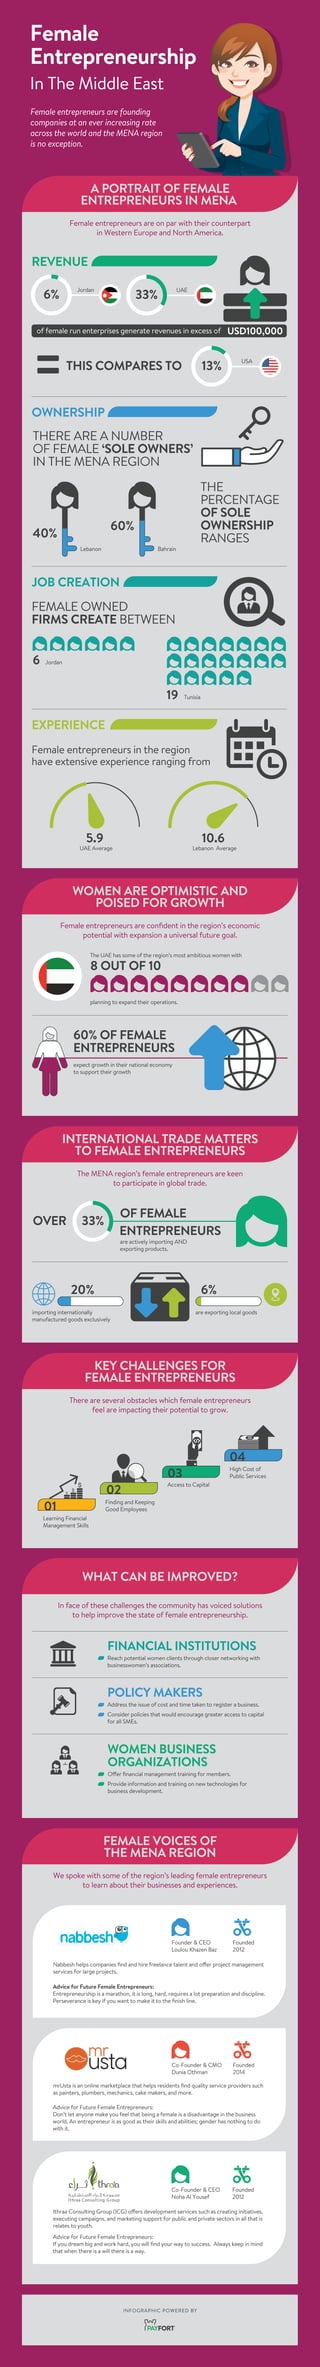 In The Middle East
Female
Entrepreneurship
Female entrepreneurs are founding
companies at an ever increasing rate
across the world and the MENA region
is no exception.
A PORTRAIT OF FEMALE
ENTREPRENEURS IN MENA
Female entrepreneurs are on par with their counterpart
in Western Europe and North America.
REVENUE
Jordan
6%
USD100,000
UAE
33%
USA
13%
=
of female run enterprises generate revenues in excess of
THIS COMPARES TO
THERE ARE A NUMBER
OF FEMALE ‘SOLE OWNERS’
IN THE MENA REGION
THE
PERCENTAGE
OF SOLE
OWNERSHIP
RANGES
60%
Bahrain
40%
Lebanon
OWNERSHIP
6 Jordan
FEMALE OWNED
FIRMS CREATE BETWEEN
19 Tunisia
JOB CREATION
5.9
UAE Average
Female entrepreneurs in the region
have extensive experience ranging from
10.6
Lebanon Average
EXPERIENCE
WOMEN ARE OPTIMISTIC AND
POISED FOR GROWTH
Female entrepreneurs are conﬁdent in the region’s economic
potential with expansion a universal future goal.
The UAE has some of the region’s most ambitious women with
8 OUT OF 10
planning to expand their operations.
60% OF FEMALE
ENTREPRENEURS
expect growth in their national economy
to support their growth
INTERNATIONAL TRADE MATTERS
TO FEMALE ENTREPRENEURS
The MENA region’s female entrepreneurs are keen
to participate in global trade.
OF FEMALE
33%
are actively importing AND
exporting products.
ENTREPRENEURS
OVER
importing internationally
manufactured goods exclusively
20%
are exporting local goods
6%
KEY CHALLENGES FOR
FEMALE ENTREPRENEURS
There are several obstacles which female entrepreneurs
feel are impacting their potential to grow.
Learning Financial
Management Skills
Finding and Keeping
Good Employees
Access to Capital
High Cost of
Public Services
01
02
03
04
WHAT CAN BE IMPROVED?
In face of these challenges the community has voiced solutions
to help improve the state of female entrepreneurship.
POLICY MAKERS
Address the issue of cost and time taken to register a business.
Consider policies that would encourage greater access to capital
for all SMEs.
WOMEN BUSINESS
ORGANIZATIONS
Offer ﬁnancial management training for members.
Provide information and training on new technologies for
business development.
FINANCIAL INSTITUTIONS
Reach potential women clients through closer networking with
businesswomen’s associations.
FEMALE VOICES OF
THE MENA REGION
We spoke with some of the region’s leading female entrepreneurs
to learn about their businesses and experiences.
Founded
2012
Founder & CEO
Loulou Khazen Baz
Advice for Future Female Entrepreneurs:
Entrepreneurship is a marathon, it is long, hard, requires a lot preparation and discipline.
Perseverance is key if you want to make it to the ﬁnish line.
Nabbesh helps companies ﬁnd and hire freelance talent and offer project management
services for large projects.
Founded
2014
Co-Founder & CMO
Dunia Othman
Advice for Future Female Entrepreneurs:
Don’t let anyone make you feel that being a female is a disadvantage in the business
world. An entrepreneur is as good as their skills and abilities; gender has nothing to do
with it.
mrUsta is an online marketplace that helps residents ﬁnd quality service providers such
as painters, plumbers, mechanics, cake makers, and more.
Founded
2012
Co-Founder & CEO
Noha Al Yousef
Advice for Future Female Entrepreneurs:
If you dream big and work hard, you will ﬁnd your way to success. Always keep in mind
that when there is a will there is a way.
Ithraa Consulting Group (ICG) offers development services such as creating initiatives,
executing campaigns, and marketing support for public and private sectors in all that is
relates to youth.
INFOGRAPHIC POWERED BY
 